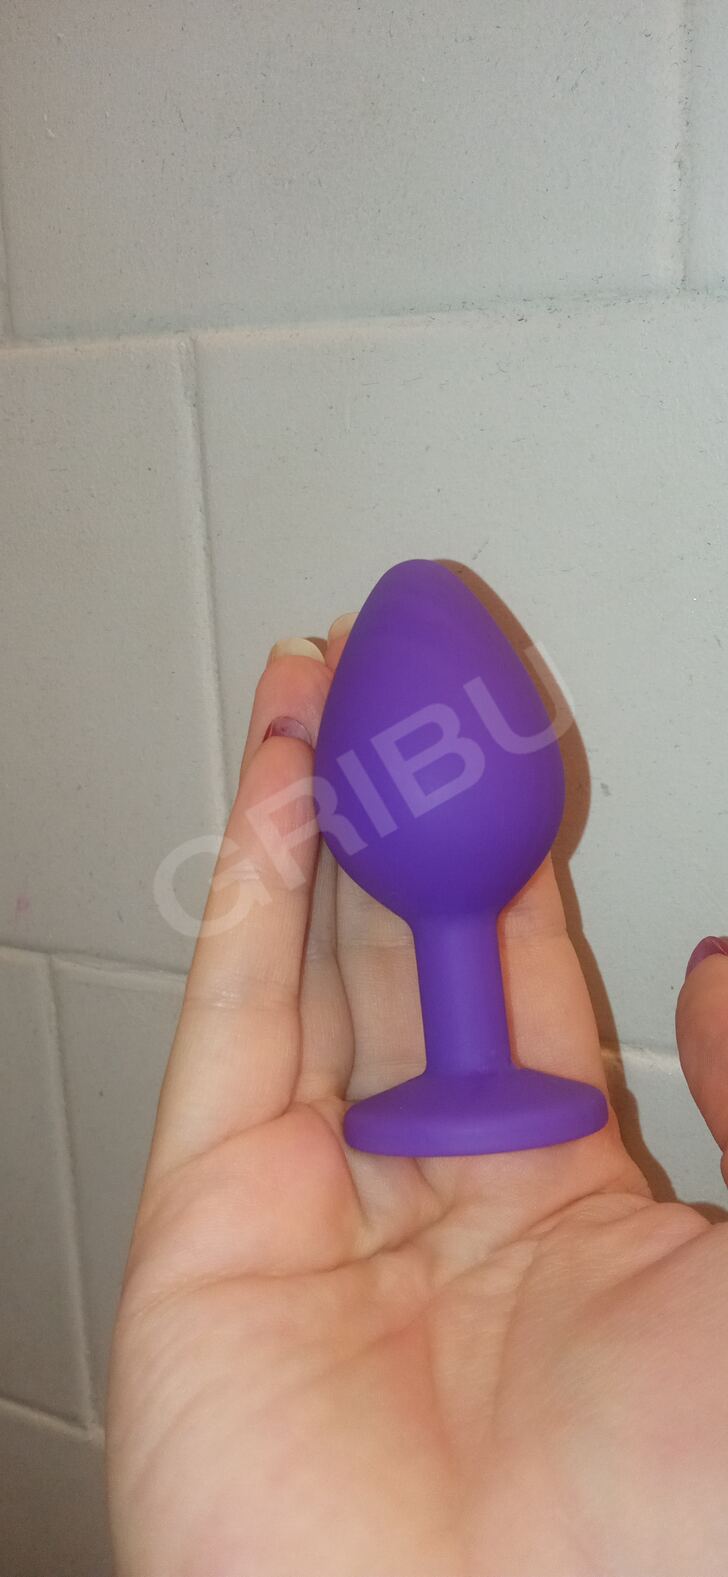 Toys and stuff for sex, Unk. Lily: lillynav850@gmail.com 1